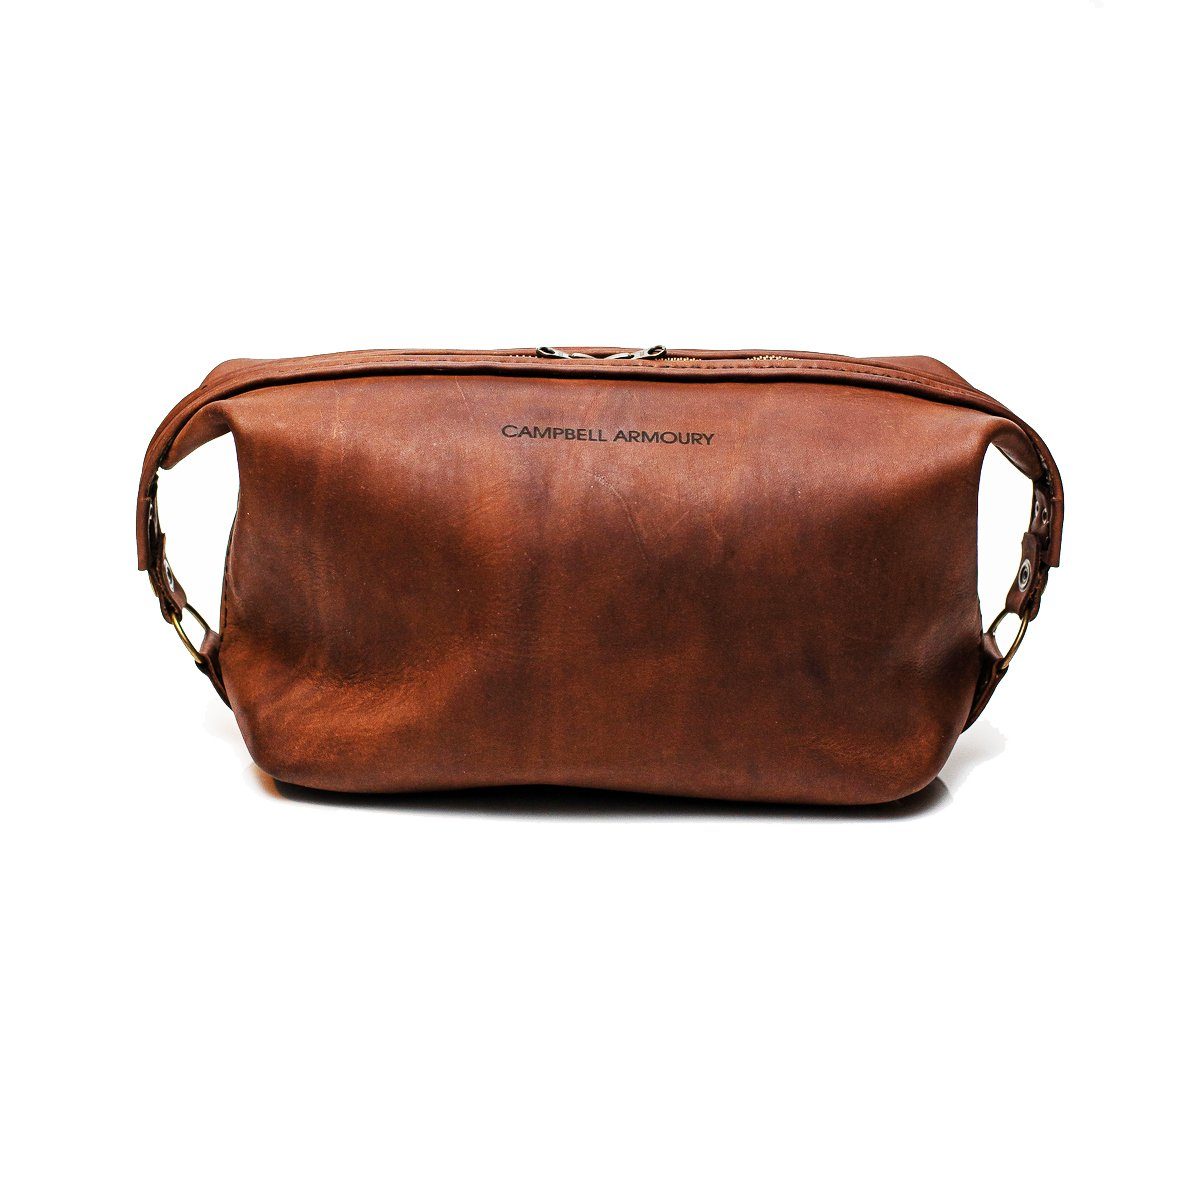 Campbell Armoury Leather Toiletry Bag Bags & Handbags Campbell Armoury brown 